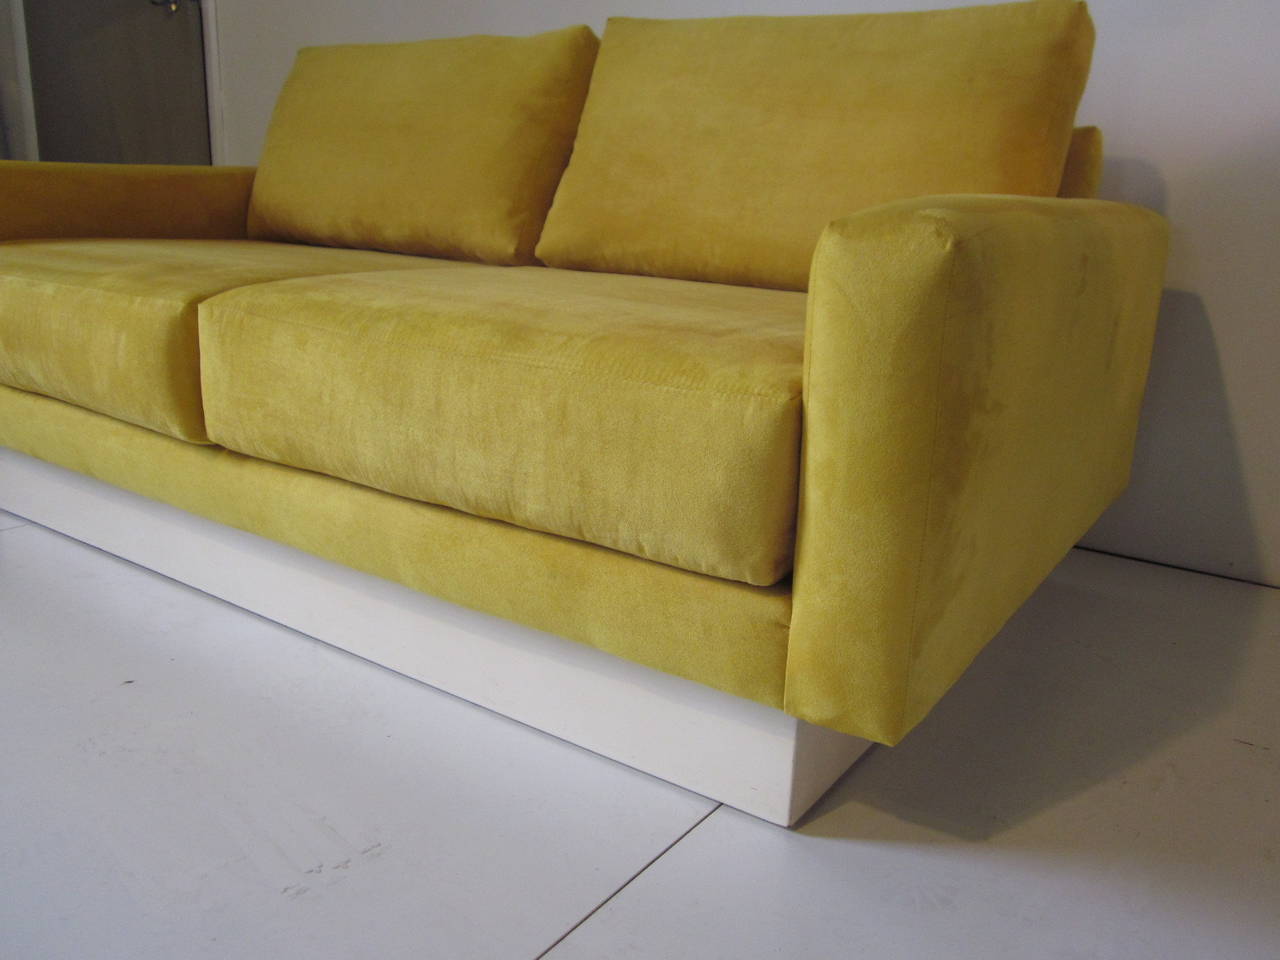 A Baughman loveseat with micro suede upholstery in a butter yellow, two back and two lower cushions sitting on a white base, manufactured by Thayer Coggin.